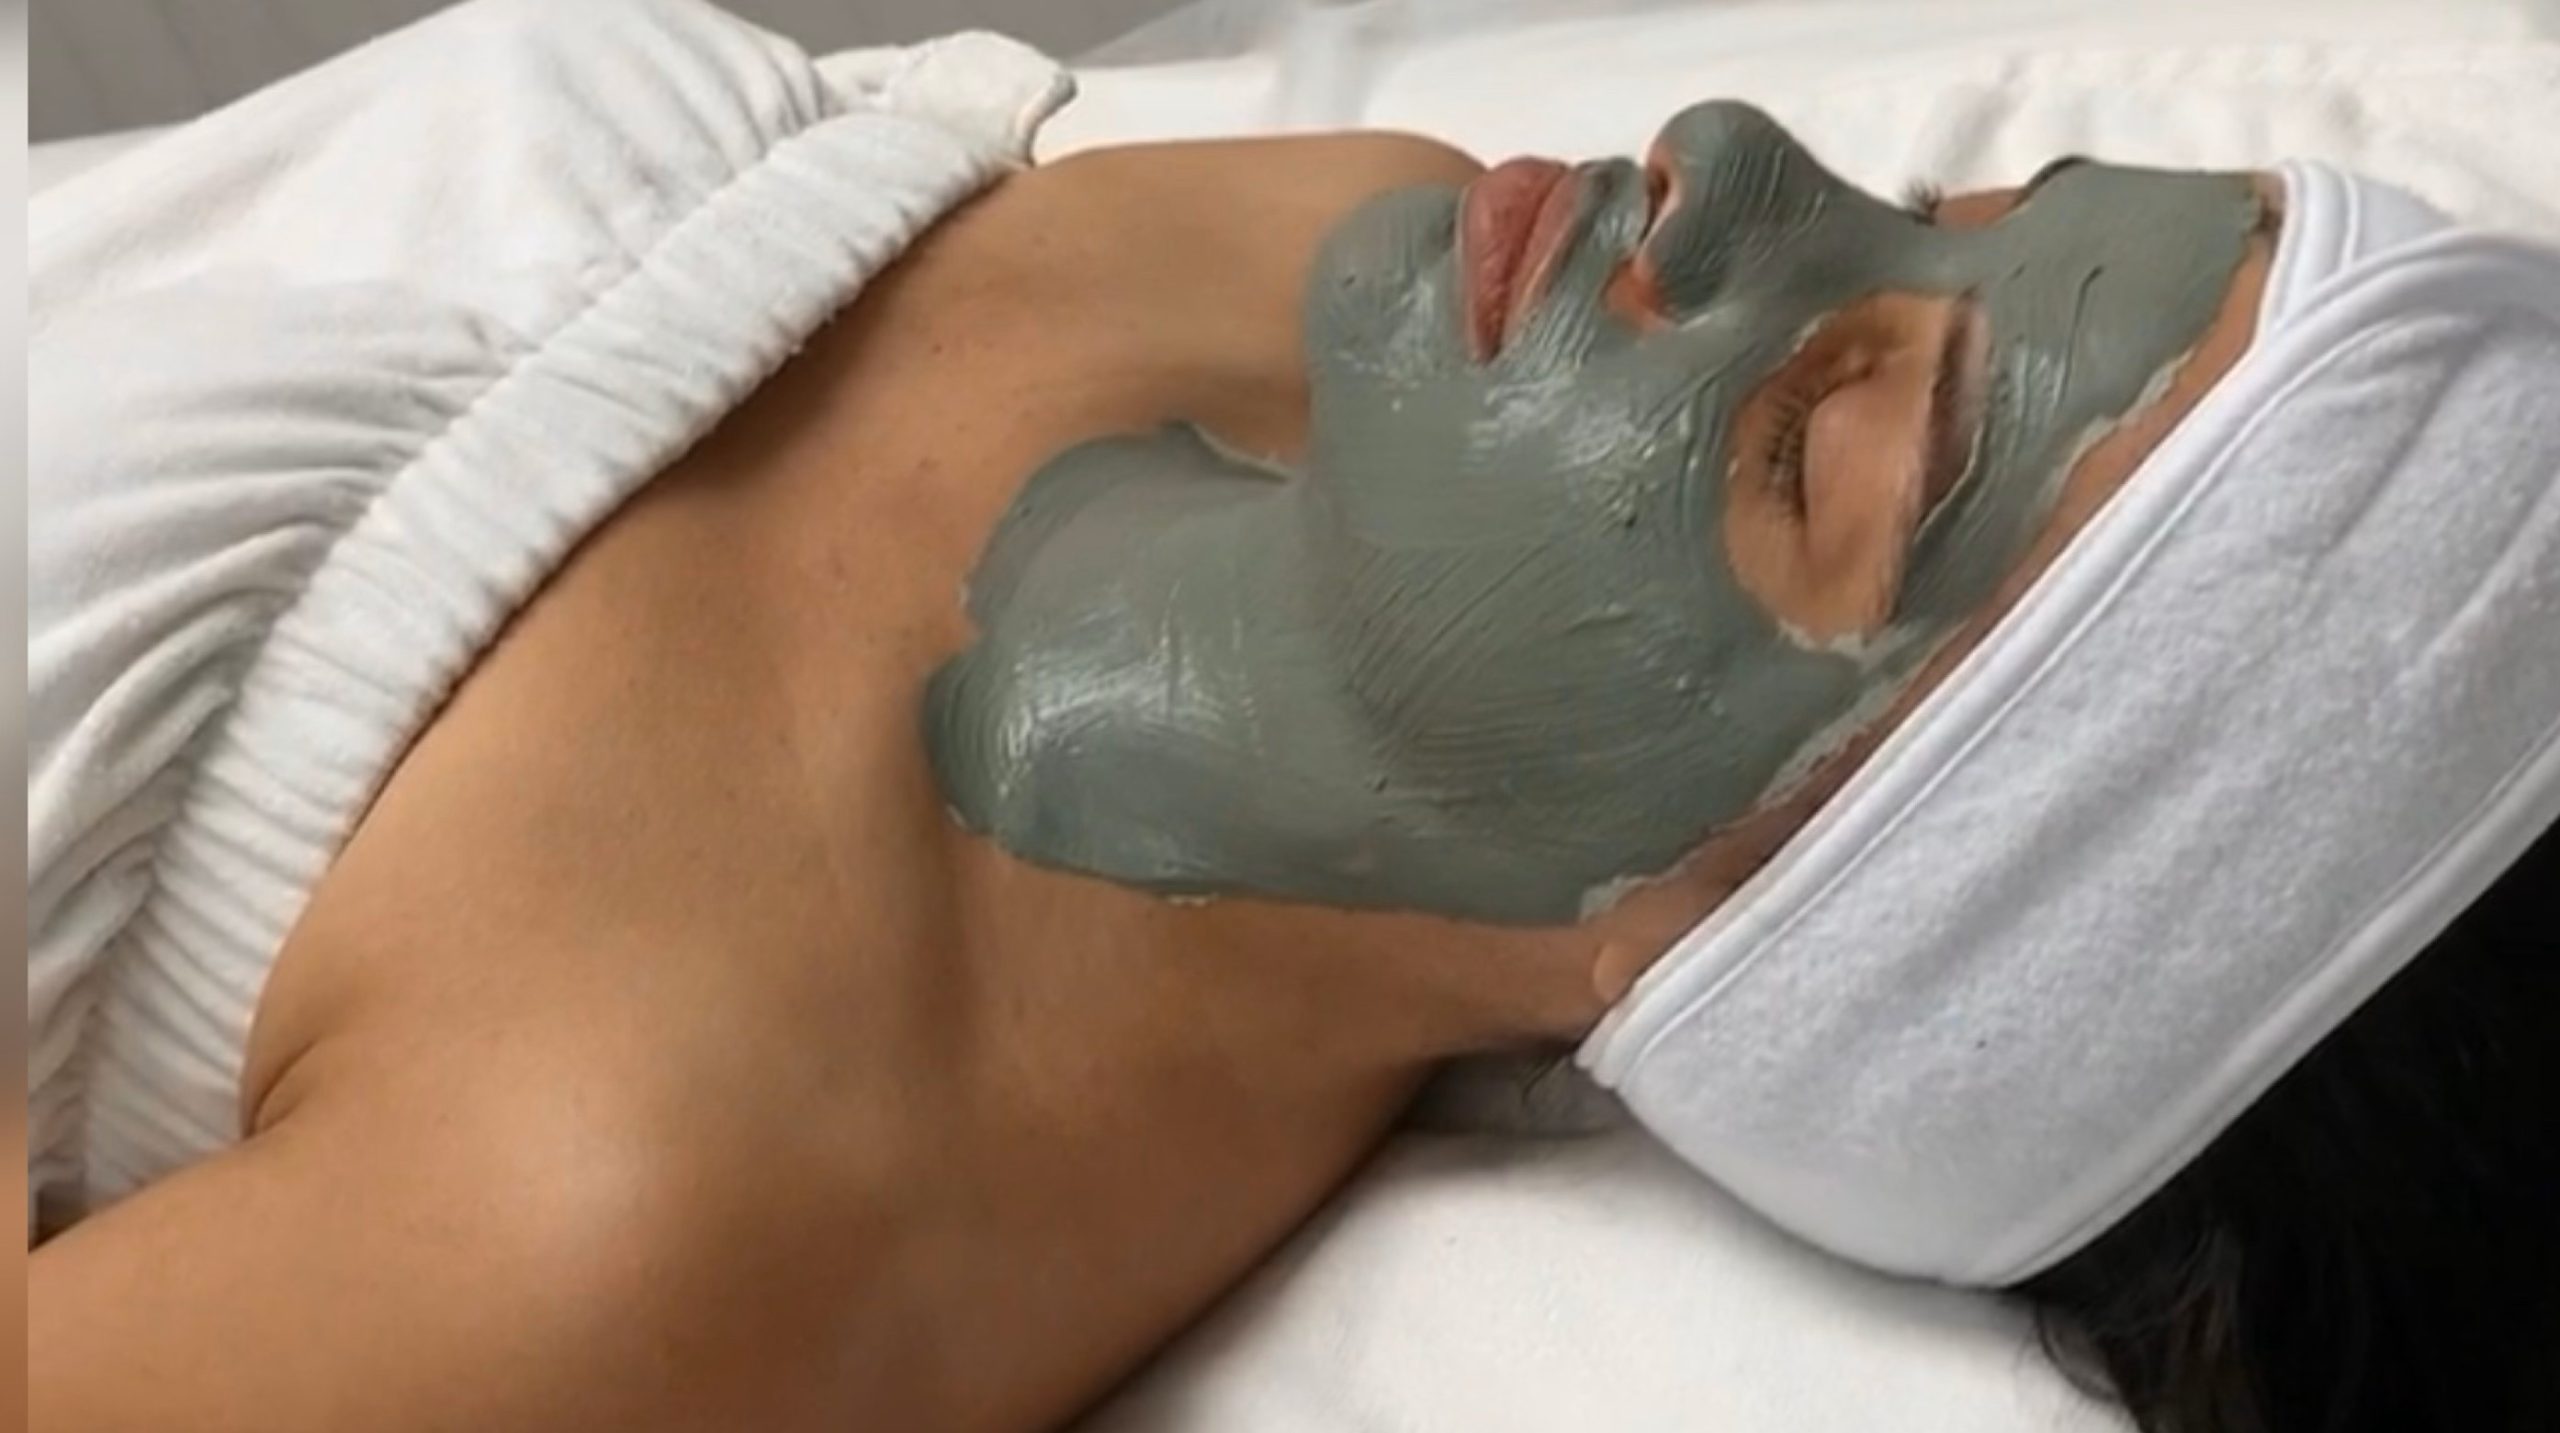 A person lying down receiving a facial treatment at Via Skincare with a thick, grey clay mask applied to their face, excluding the eyes and mouth areas, in a serene spa environment.